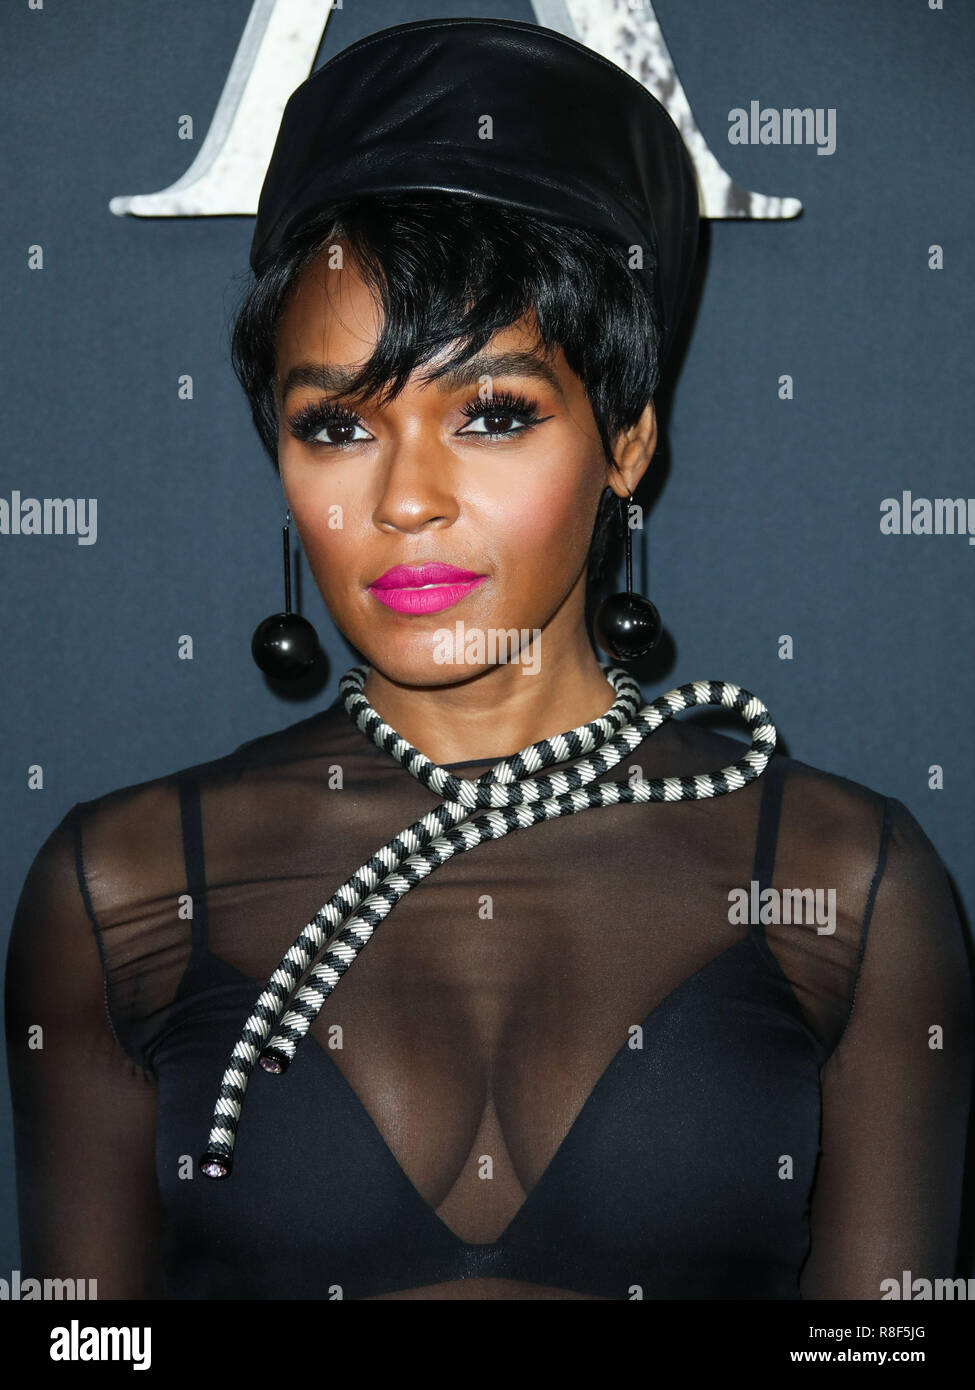 WESTWOOD, LOS ANGELES, CA, USA - FEBRUARY 13: Janelle Monae at the Los Angeles Premiere Of Paramount Pictures' 'Annihilation' held at the Regency Village Theatre on February 13, 2018 in Westwood, Los Angeles, California, United States. (Photo by Xavier Collin/Image Press Agency) Stock Photo